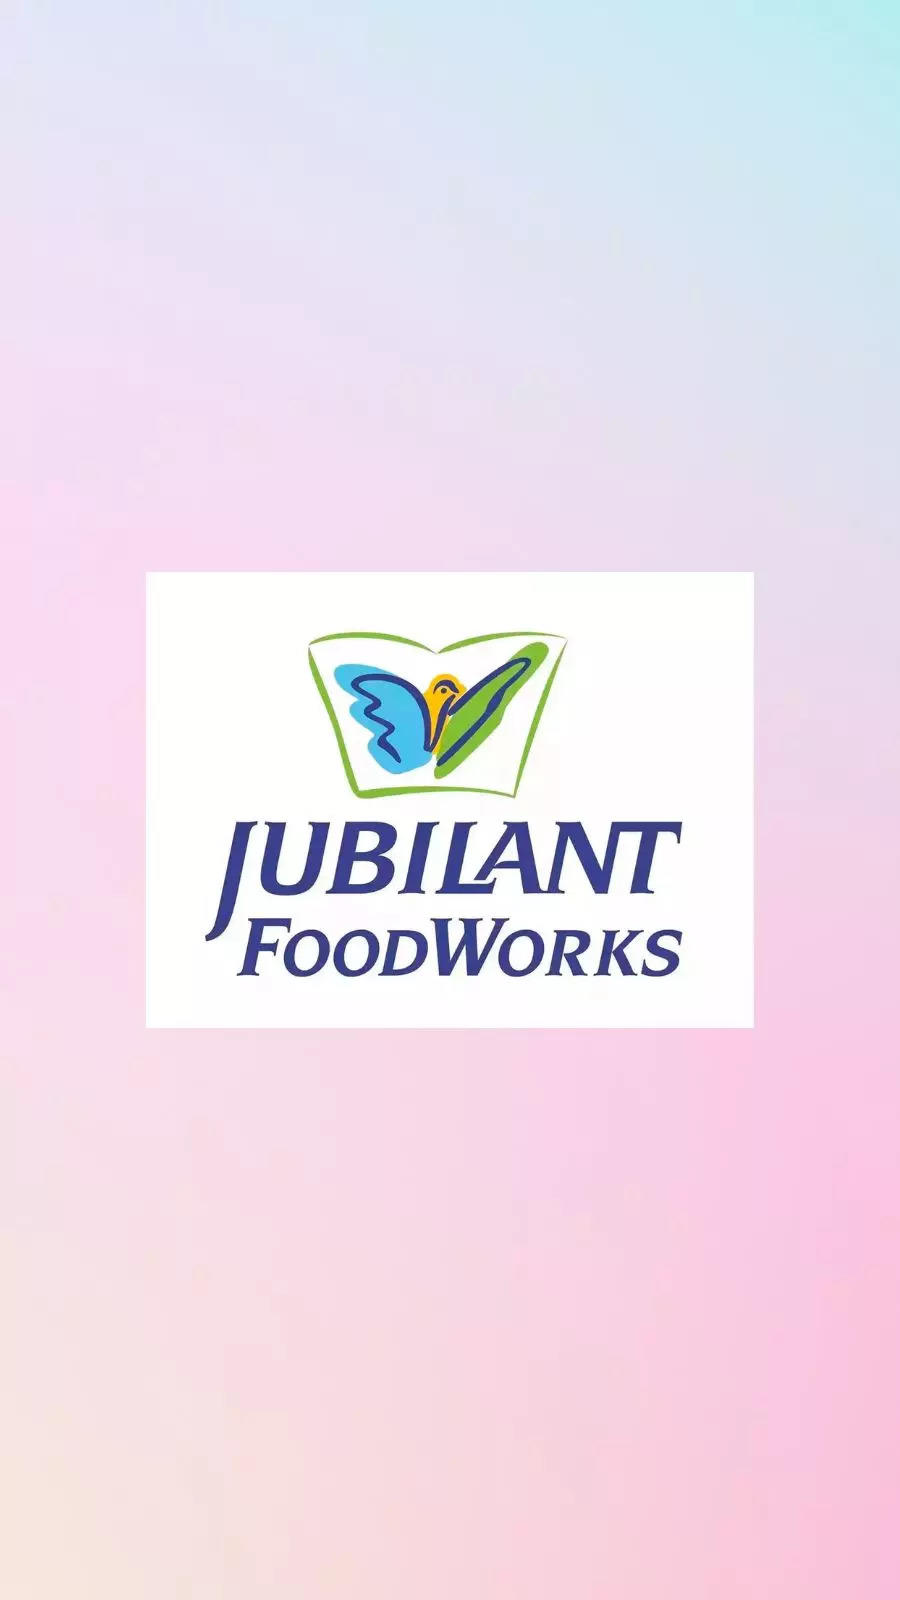 Jubilant FoodWorks plans to open 250 Dominos stores, 40-50 Popeye outlets  in India within a year - YouTube